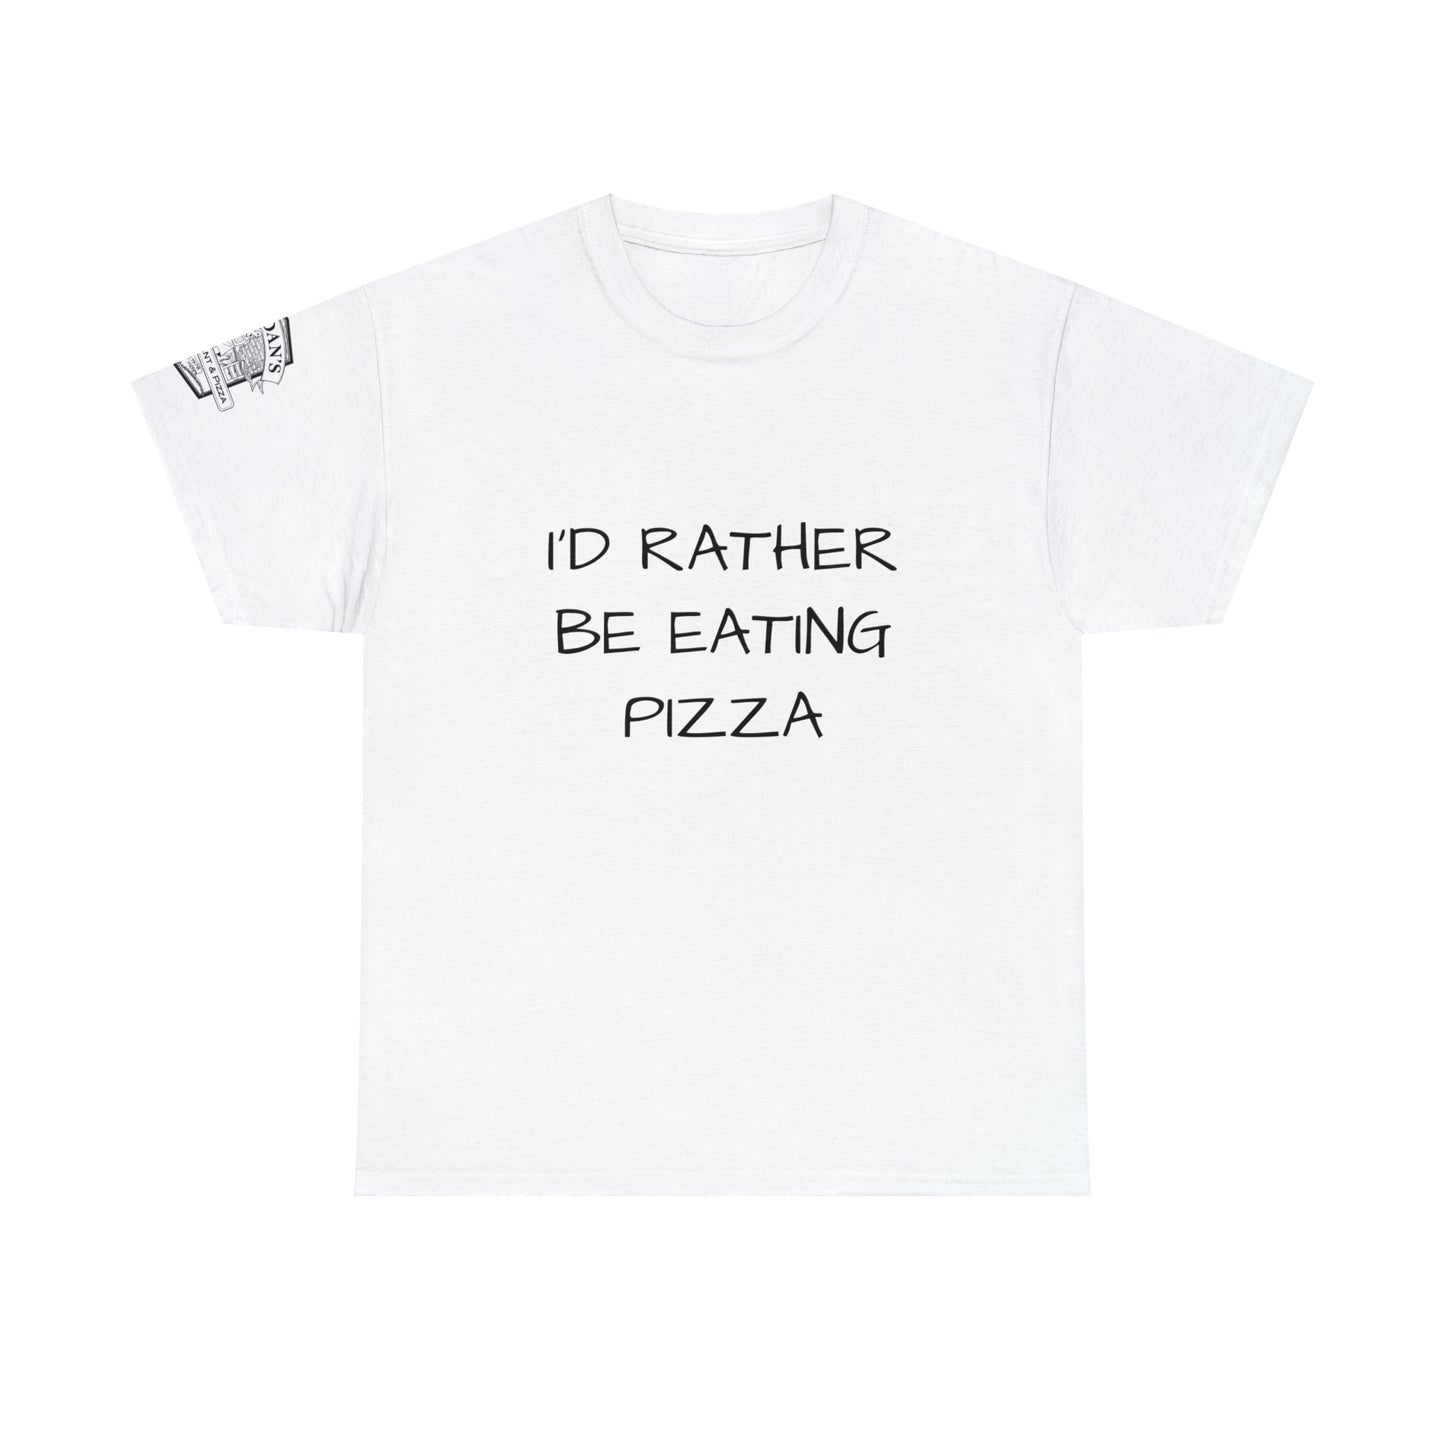 I'd Rather Be Eating Pizza - Adult T-shirt